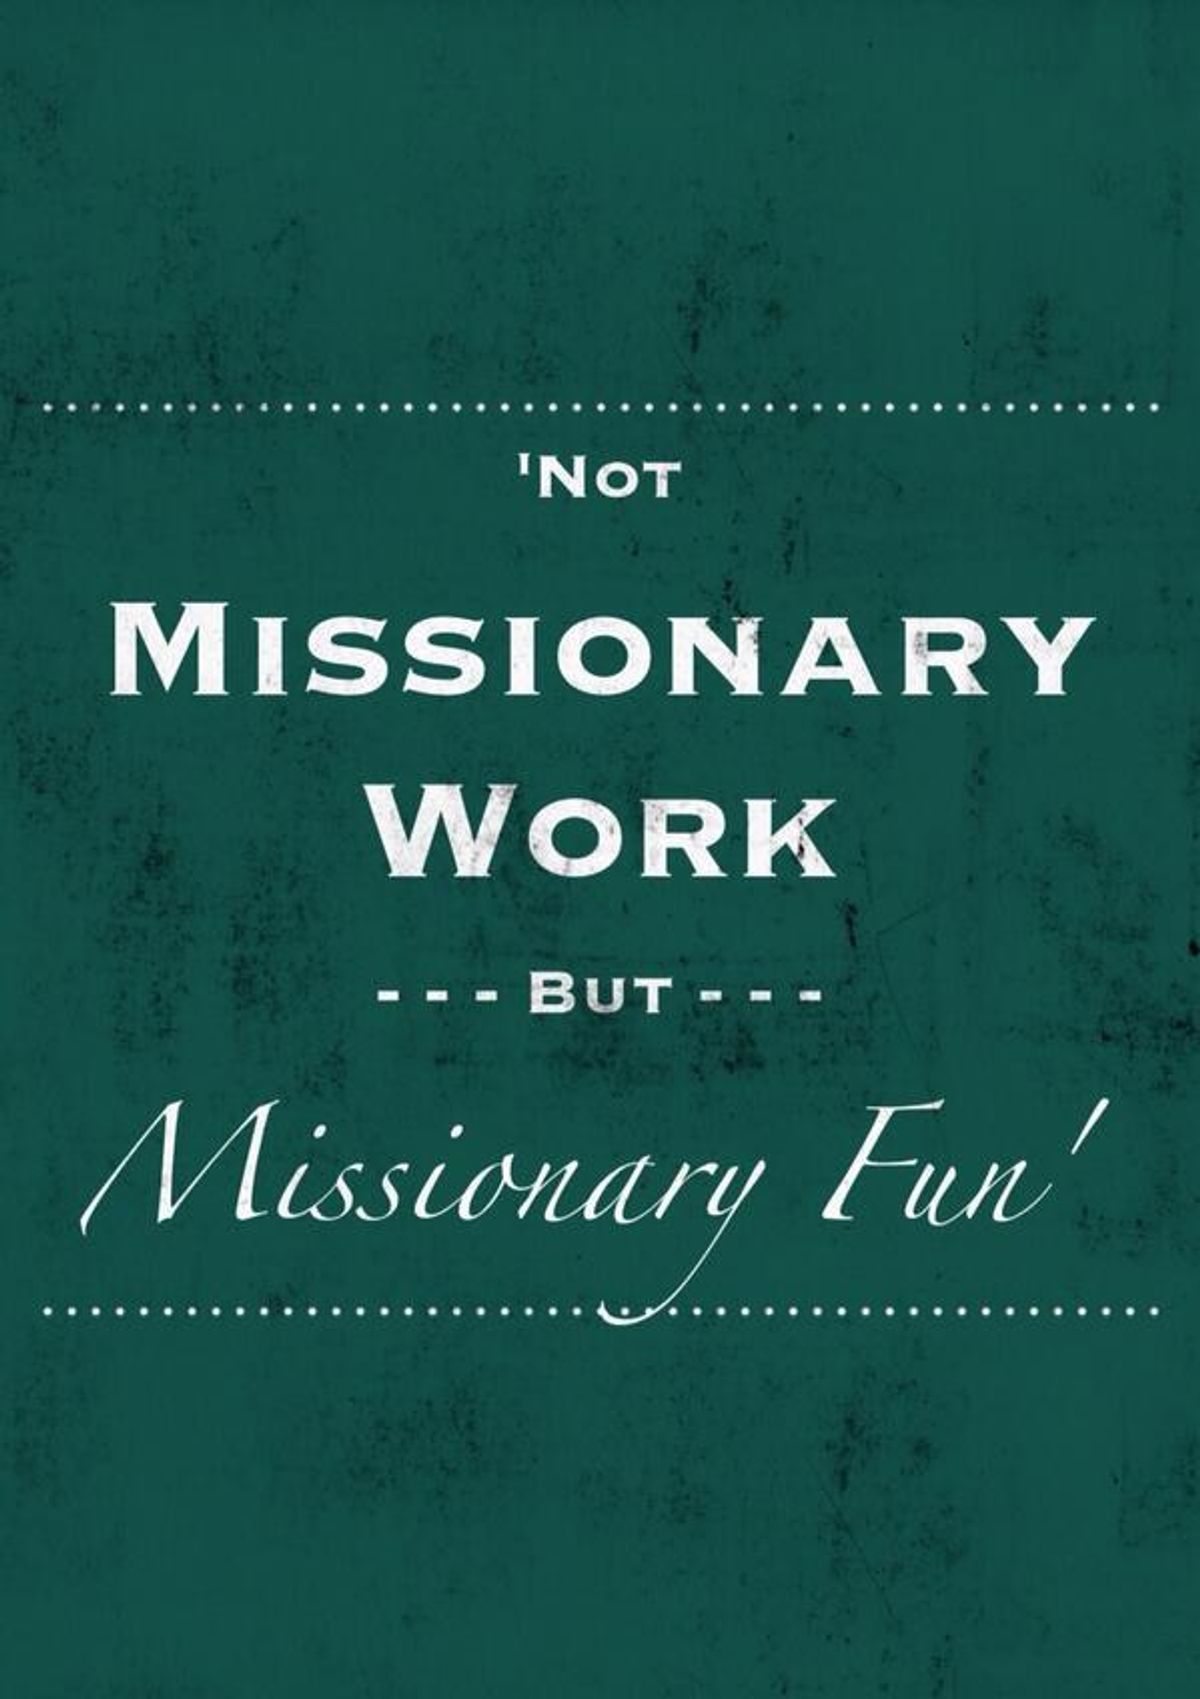 Selfless Or Selfish: A Missionary's Motivation